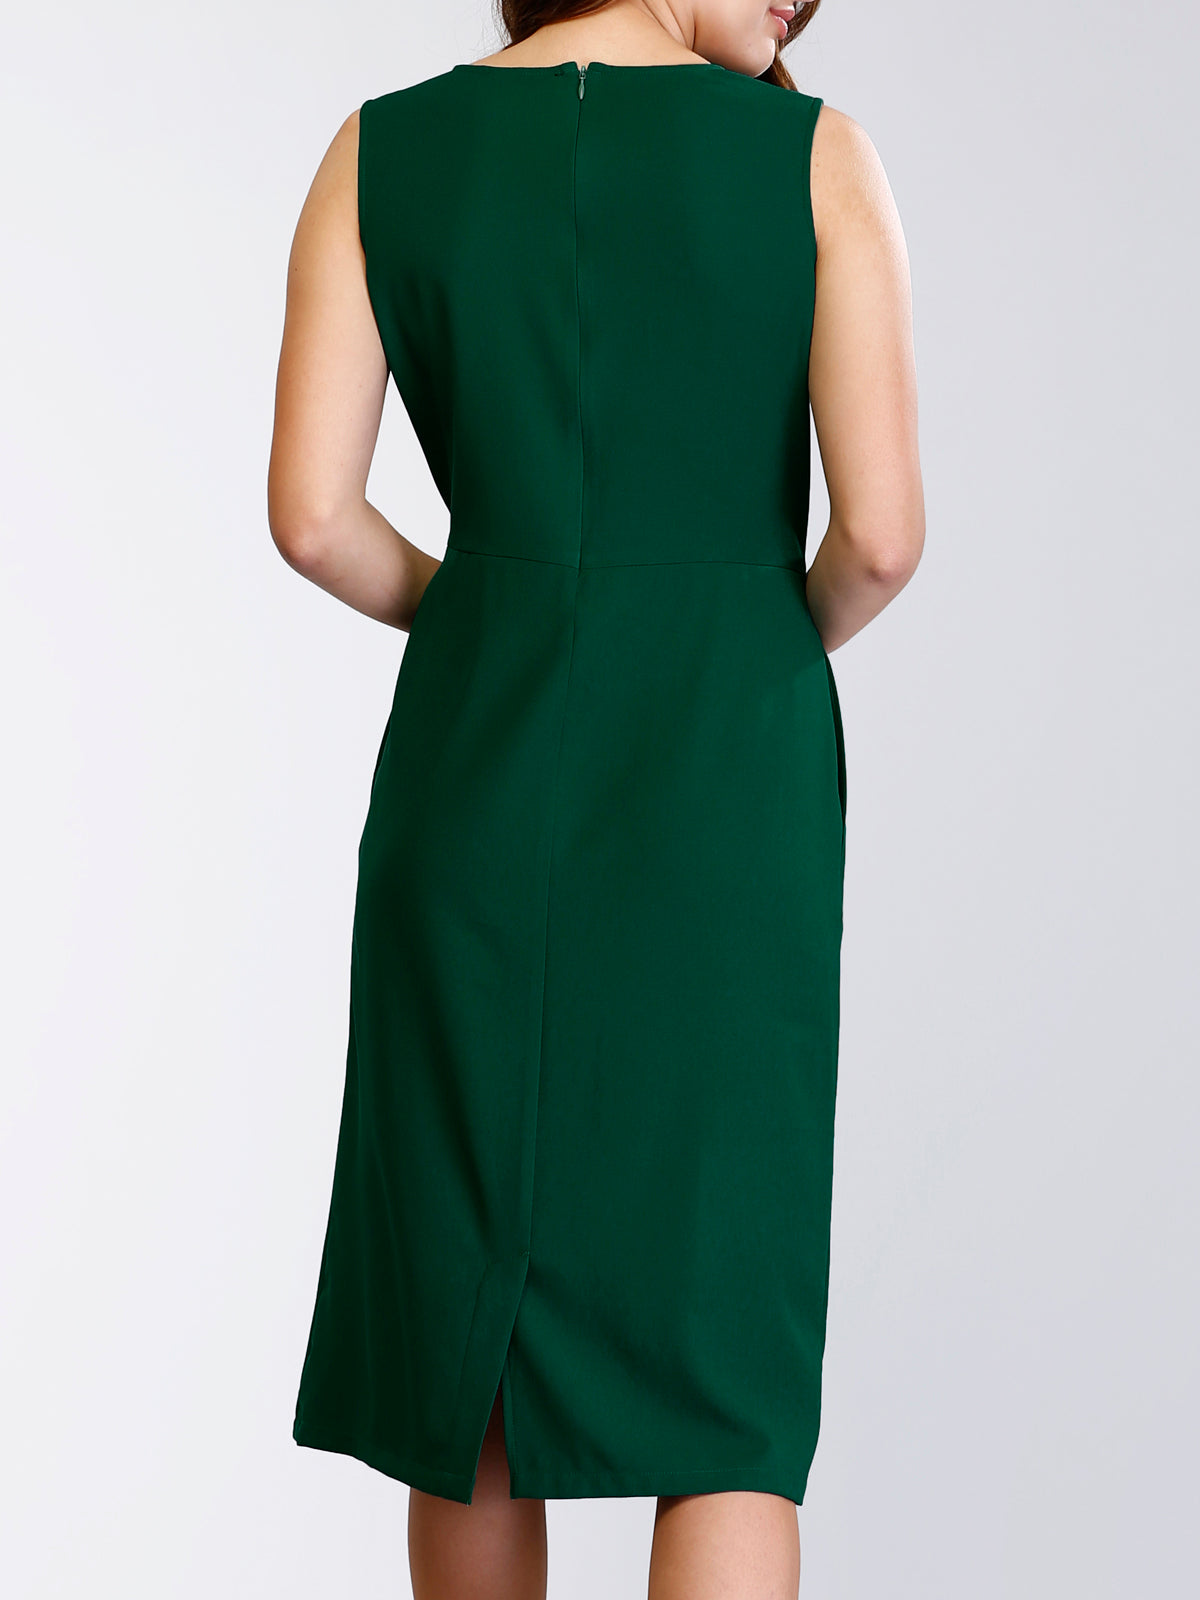 Buy Emerald Green Round Neck Pleated ...